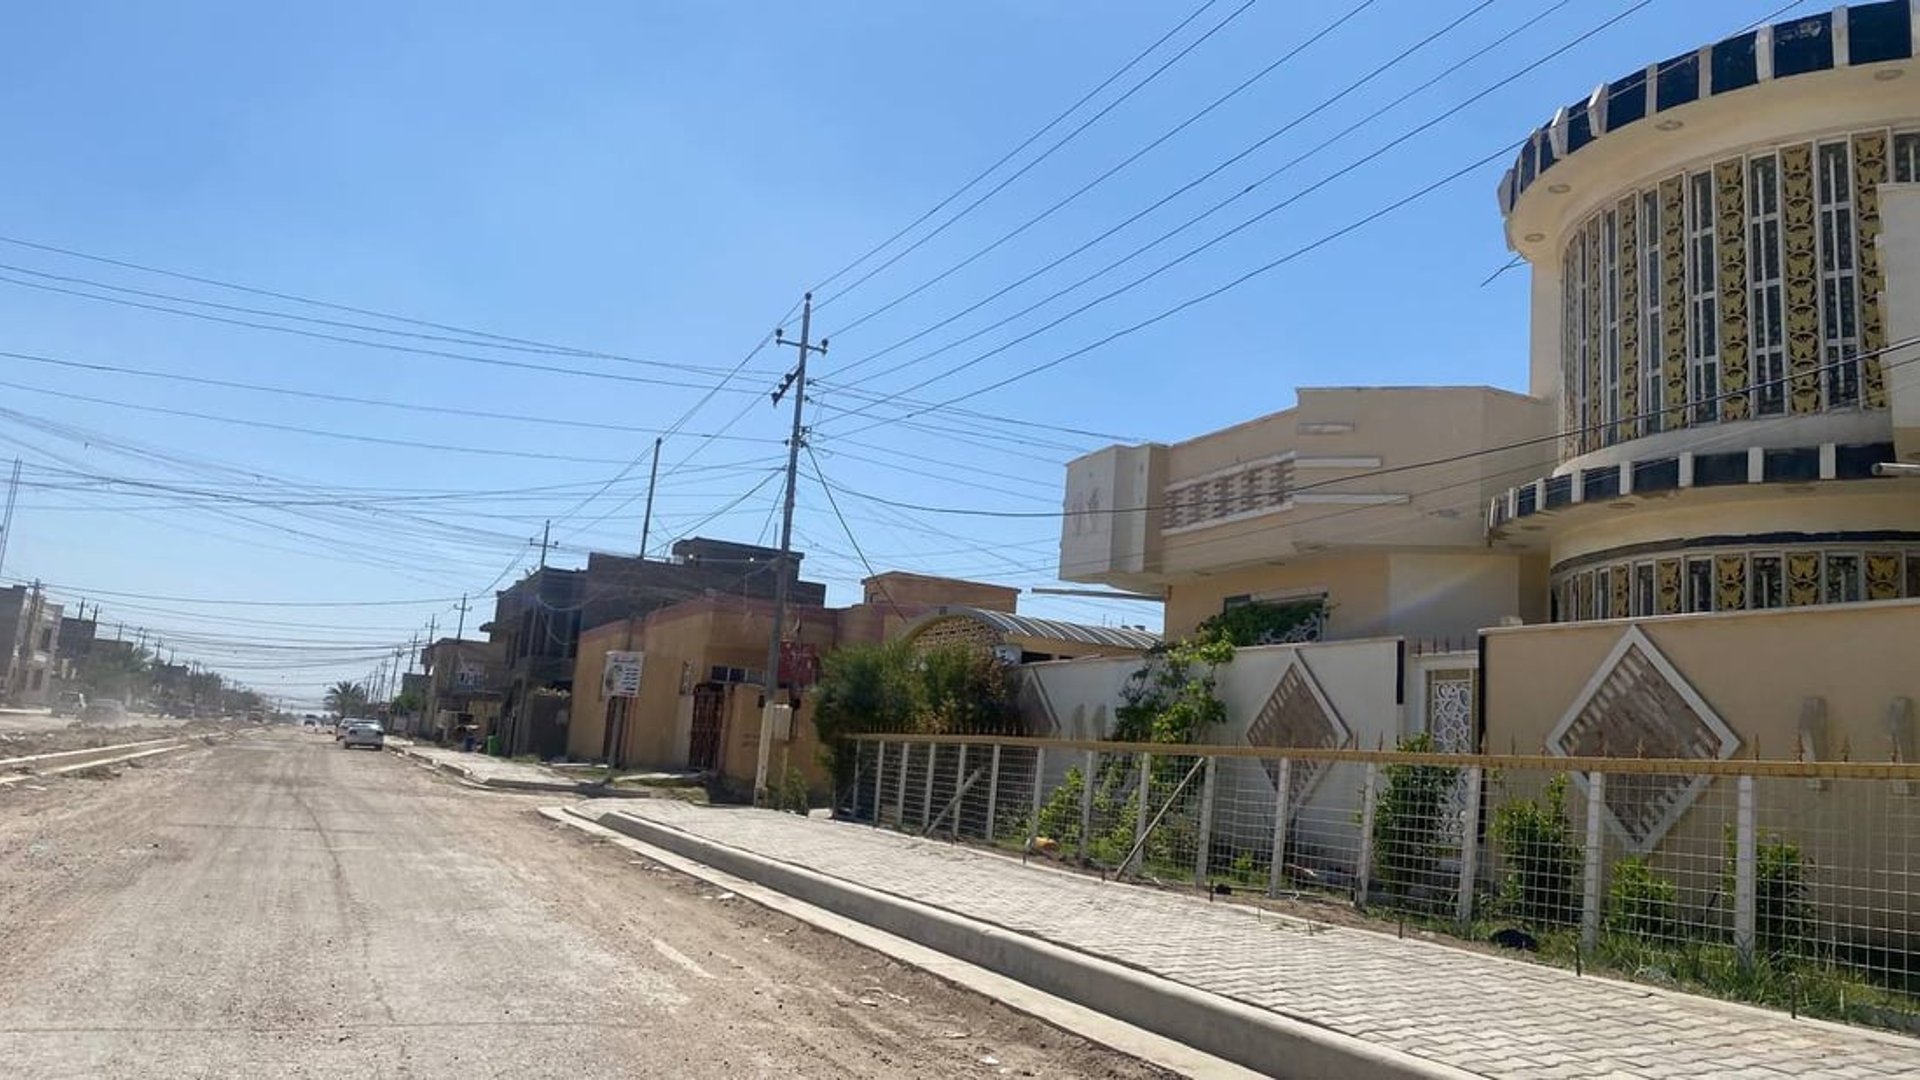 Property prices in western Baghdad surge with construction of AlJawahiri complex